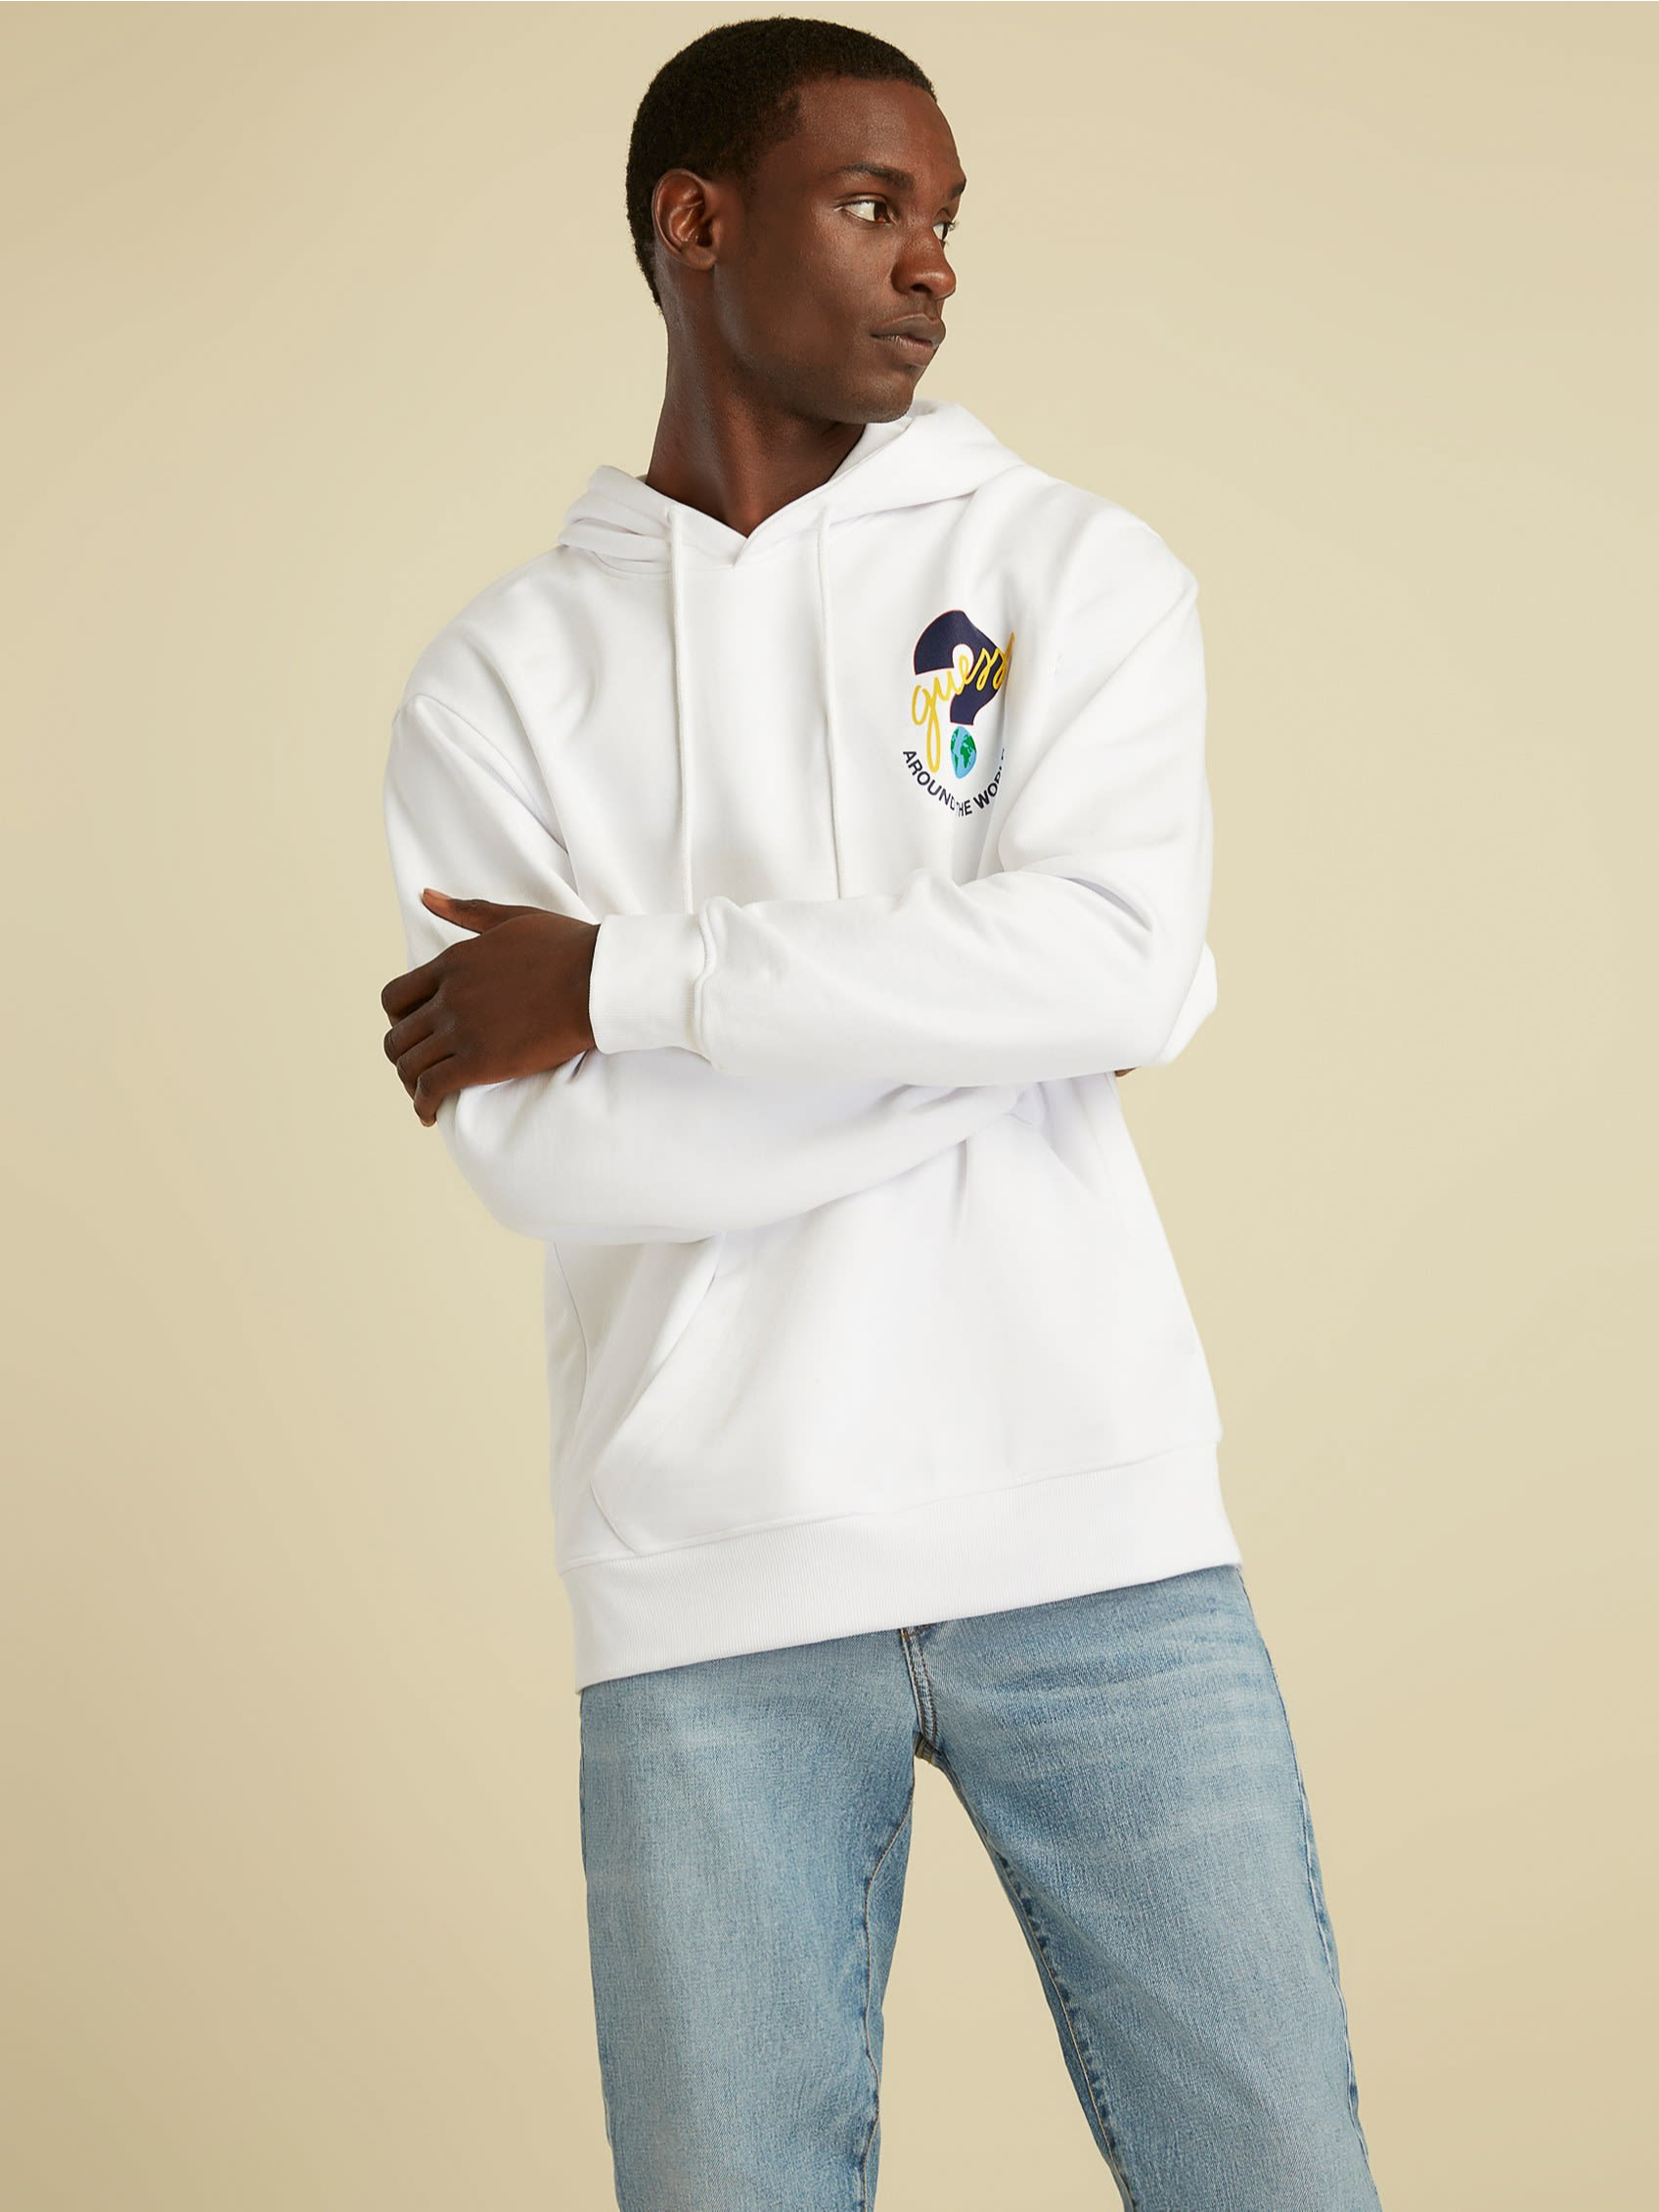 GUESS Originals x Olympics LOGO HOODIE | Guess Philippines